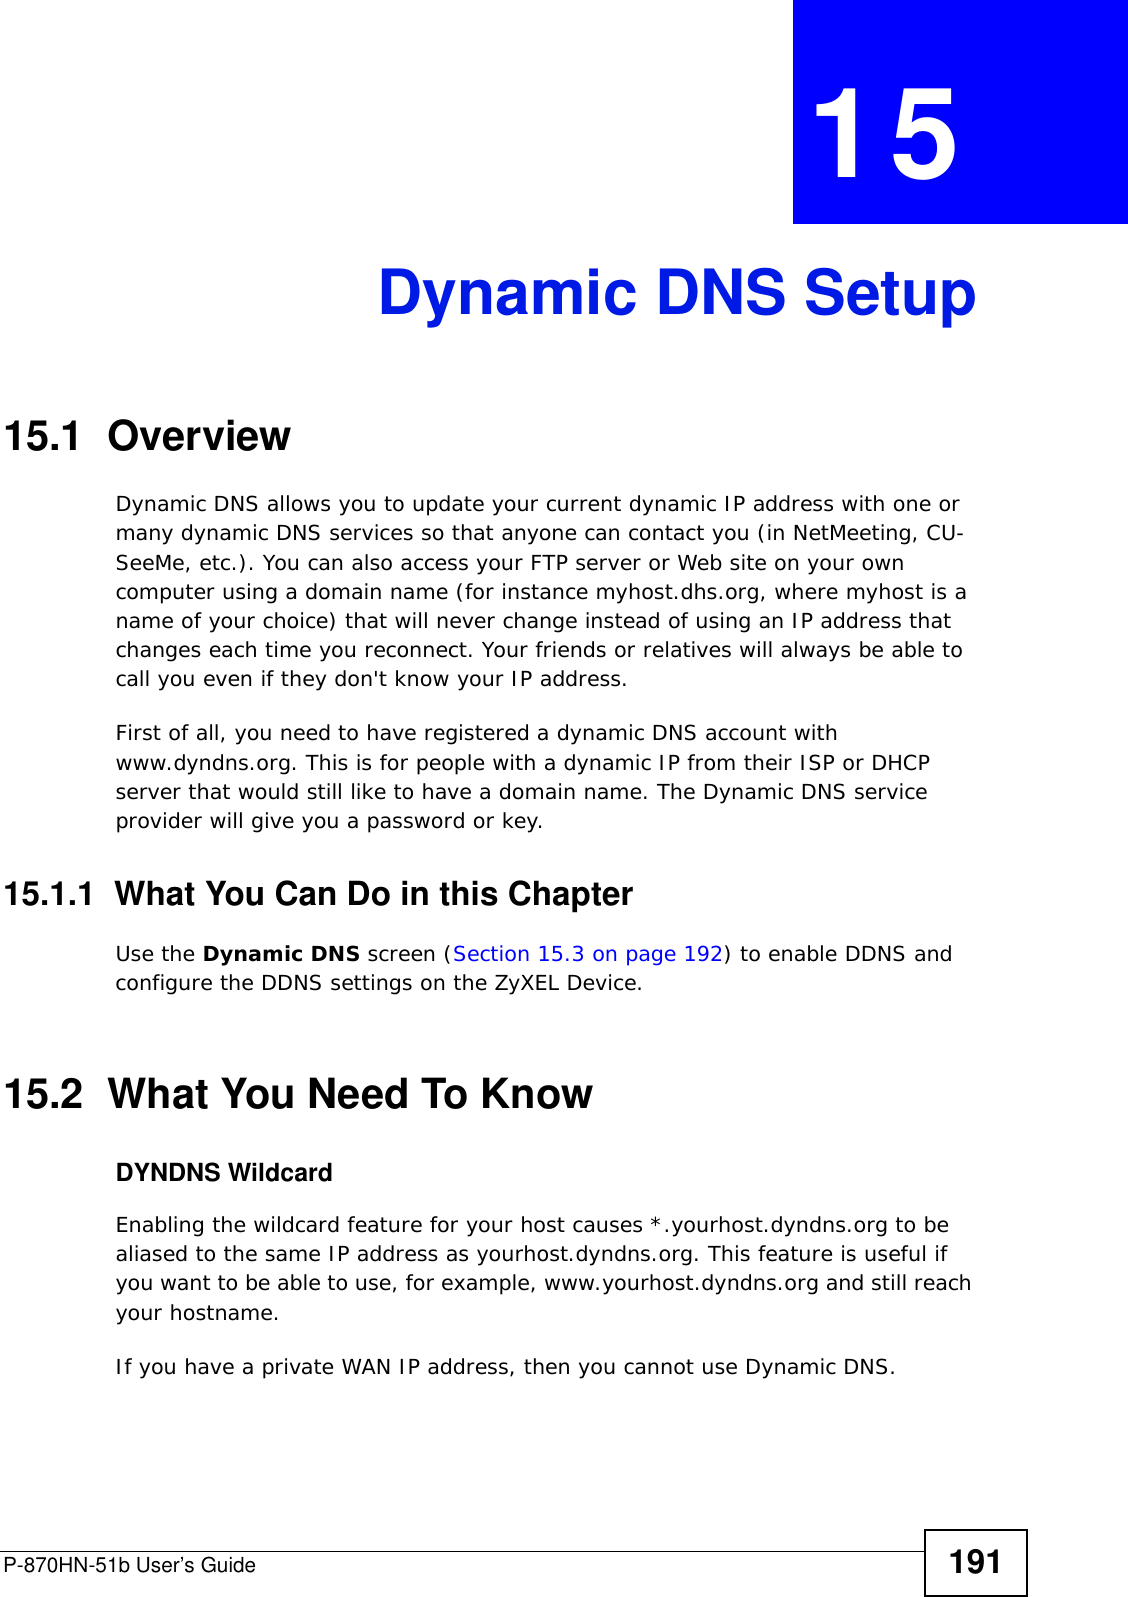 P-870HN-51b User’s Guide 191CHAPTER  15 Dynamic DNS Setup15.1  Overview Dynamic DNS allows you to update your current dynamic IP address with one or many dynamic DNS services so that anyone can contact you (in NetMeeting, CU-SeeMe, etc.). You can also access your FTP server or Web site on your own computer using a domain name (for instance myhost.dhs.org, where myhost is a name of your choice) that will never change instead of using an IP address that changes each time you reconnect. Your friends or relatives will always be able to call you even if they don&apos;t know your IP address.First of all, you need to have registered a dynamic DNS account with www.dyndns.org. This is for people with a dynamic IP from their ISP or DHCP server that would still like to have a domain name. The Dynamic DNS service provider will give you a password or key. 15.1.1  What You Can Do in this ChapterUse the Dynamic DNS screen (Section 15.3 on page 192) to enable DDNS and configure the DDNS settings on the ZyXEL Device.15.2  What You Need To KnowDYNDNS WildcardEnabling the wildcard feature for your host causes *.yourhost.dyndns.org to be aliased to the same IP address as yourhost.dyndns.org. This feature is useful if you want to be able to use, for example, www.yourhost.dyndns.org and still reach your hostname.If you have a private WAN IP address, then you cannot use Dynamic DNS.